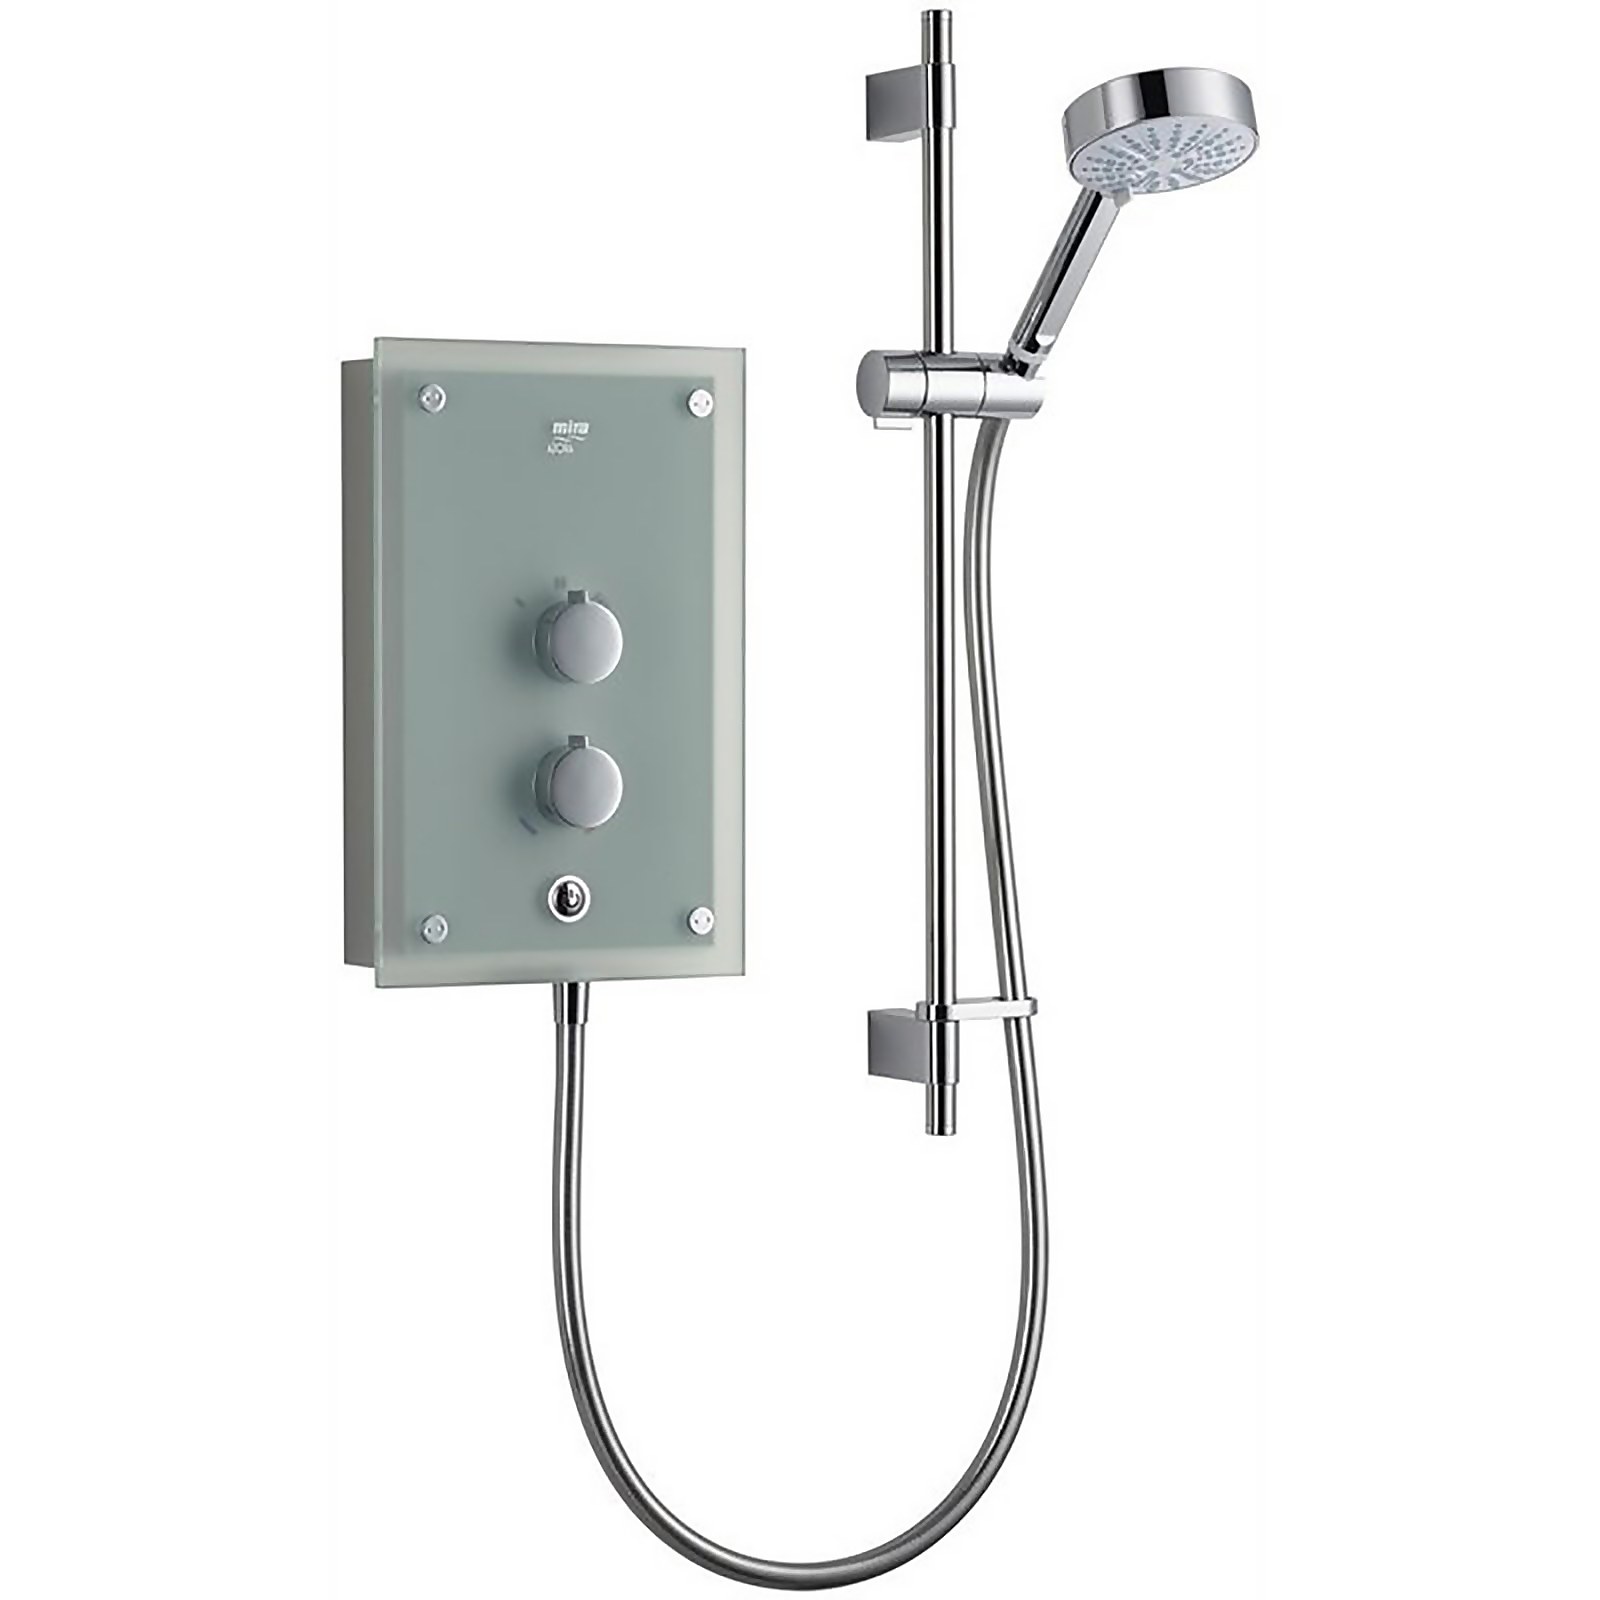 Photo of Mira Azora 9.8kw Frosted Glass Electric Shower